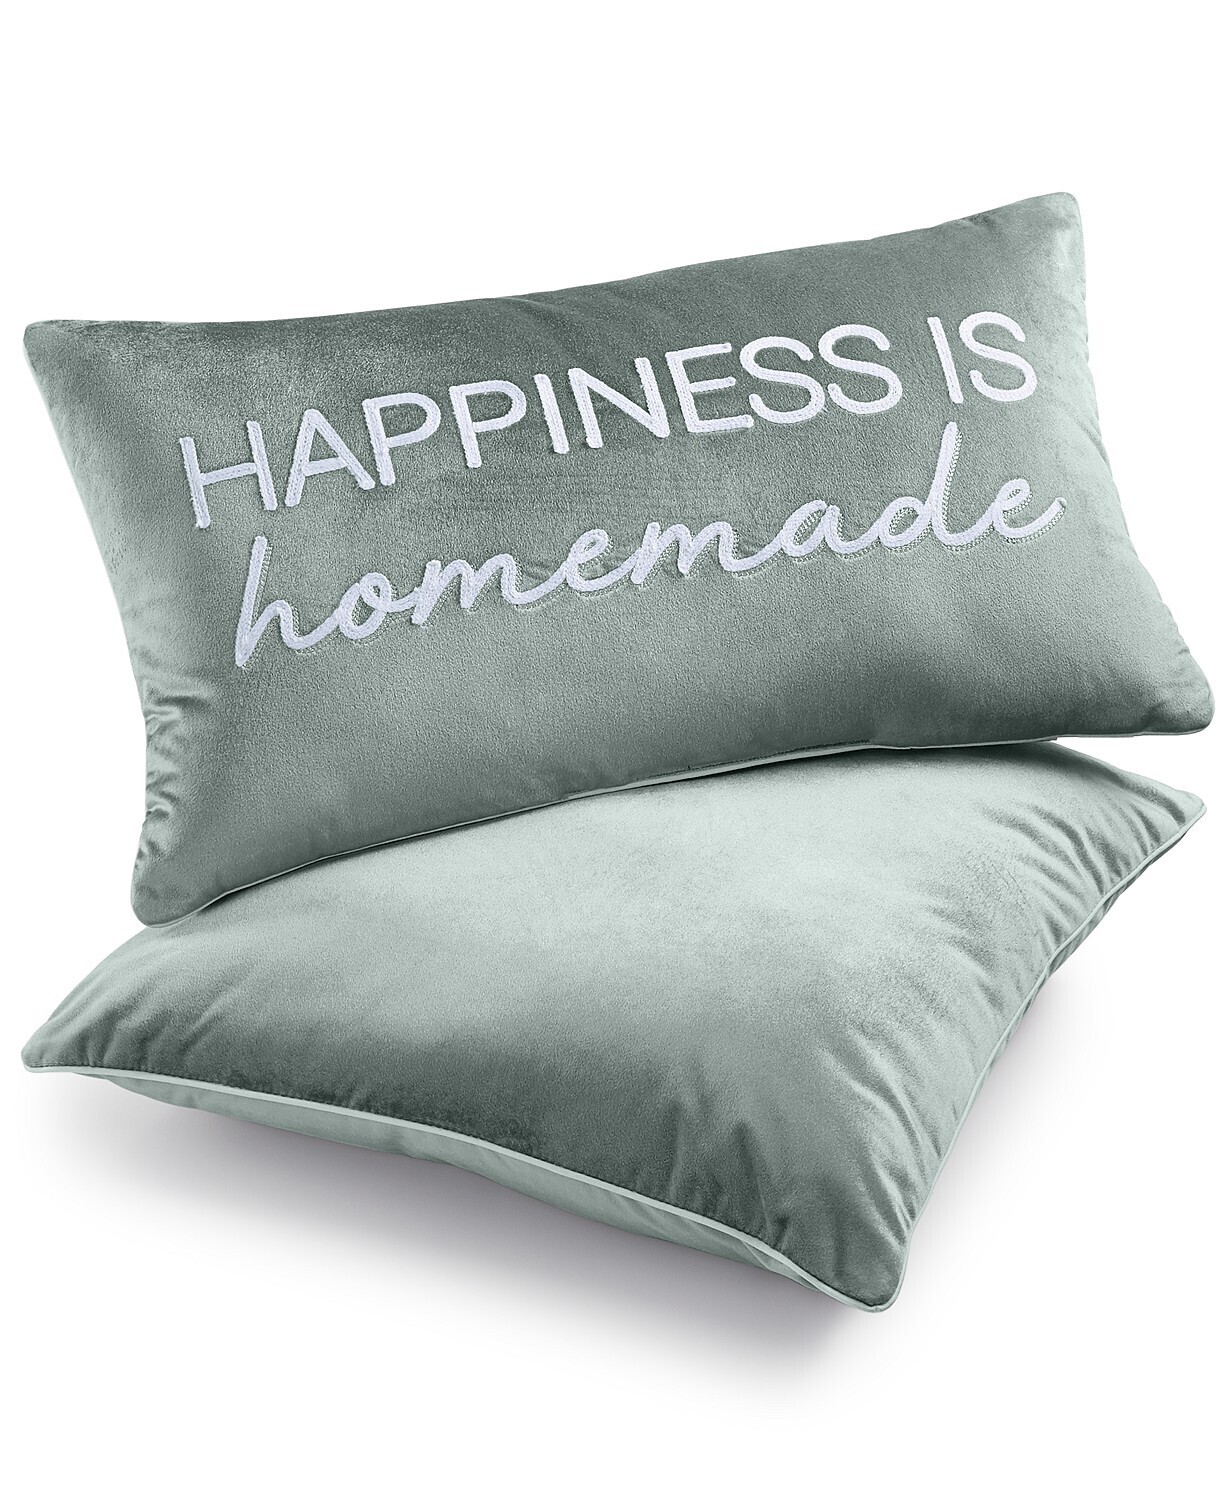 Lacourte 2-Pk. Happiness is Homemade 14" x 24" Decorative Pillows